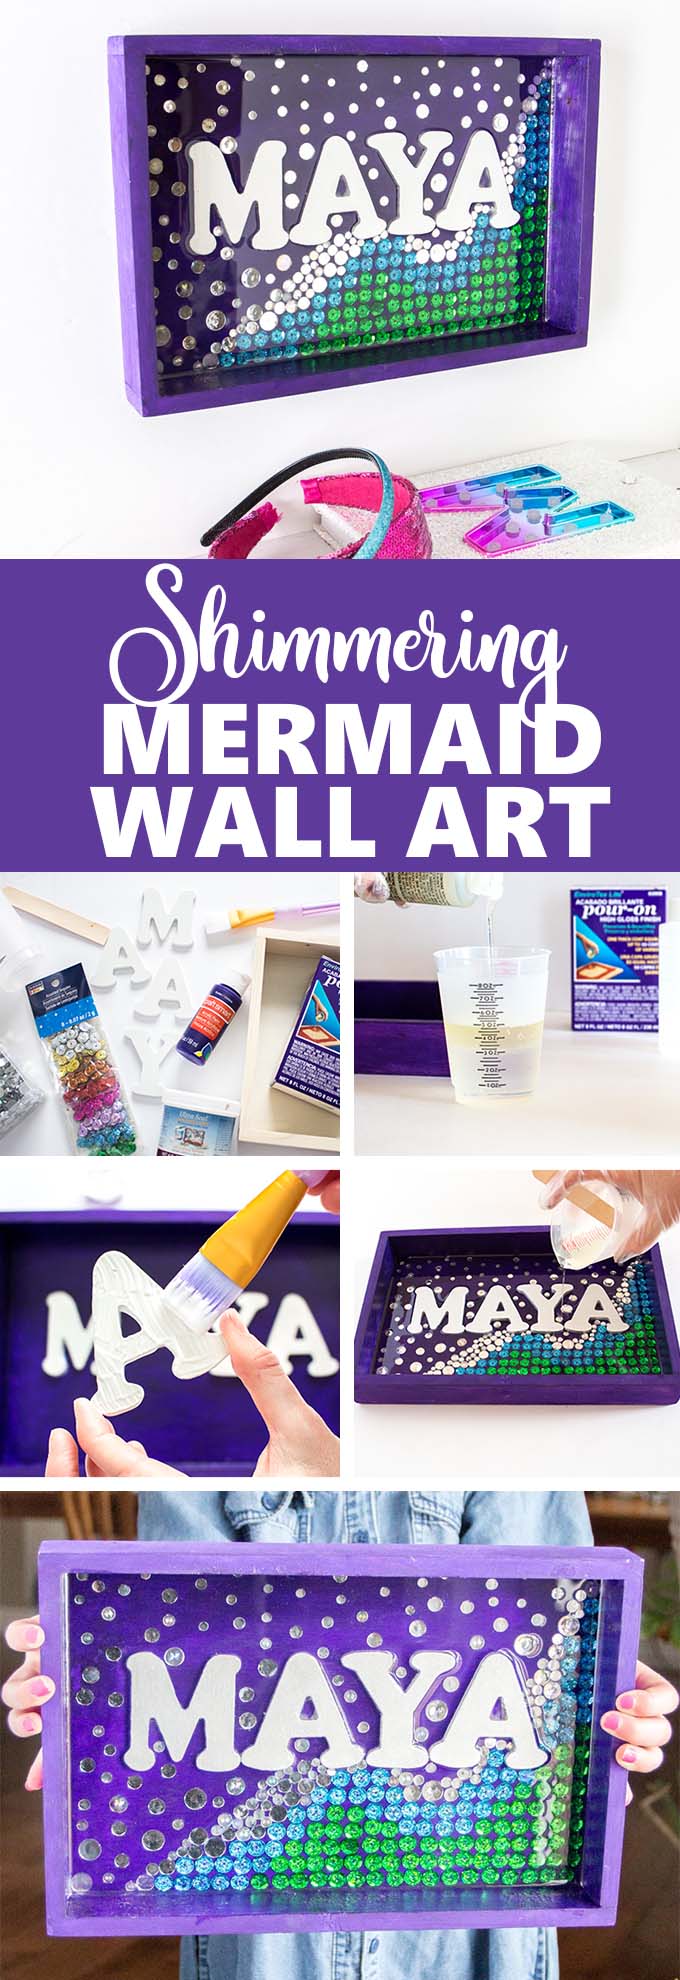 So pretty for a girl's bedroom! Shimmering mermaid wall art name plate with resin. #envirotexlite #resincrafts #resincraftsblog via @resincraftsblog